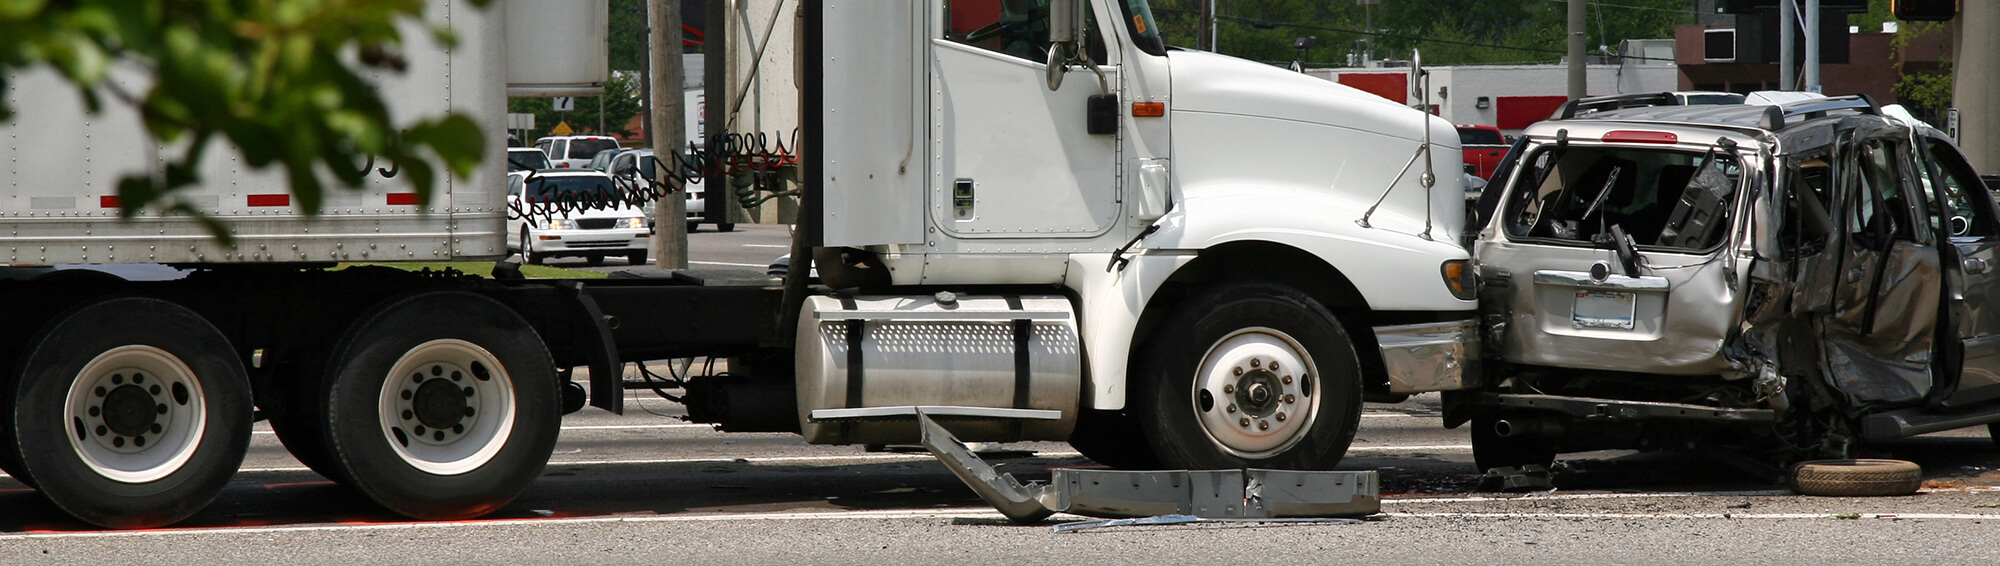 Trucking Accidents: Living a Nightmare